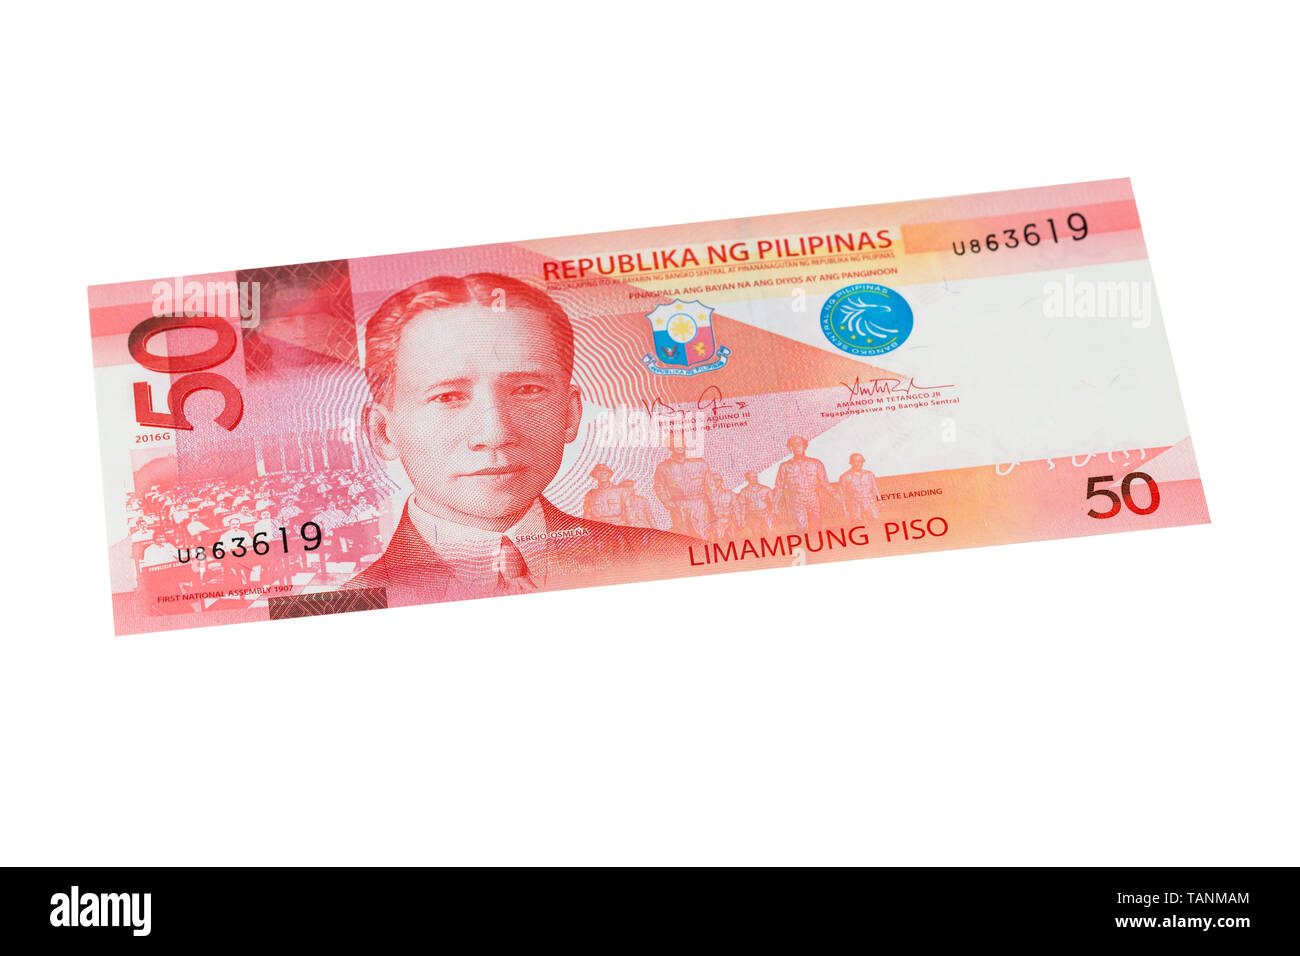 Philippine fifty peso banknote on a white background Stock Photo